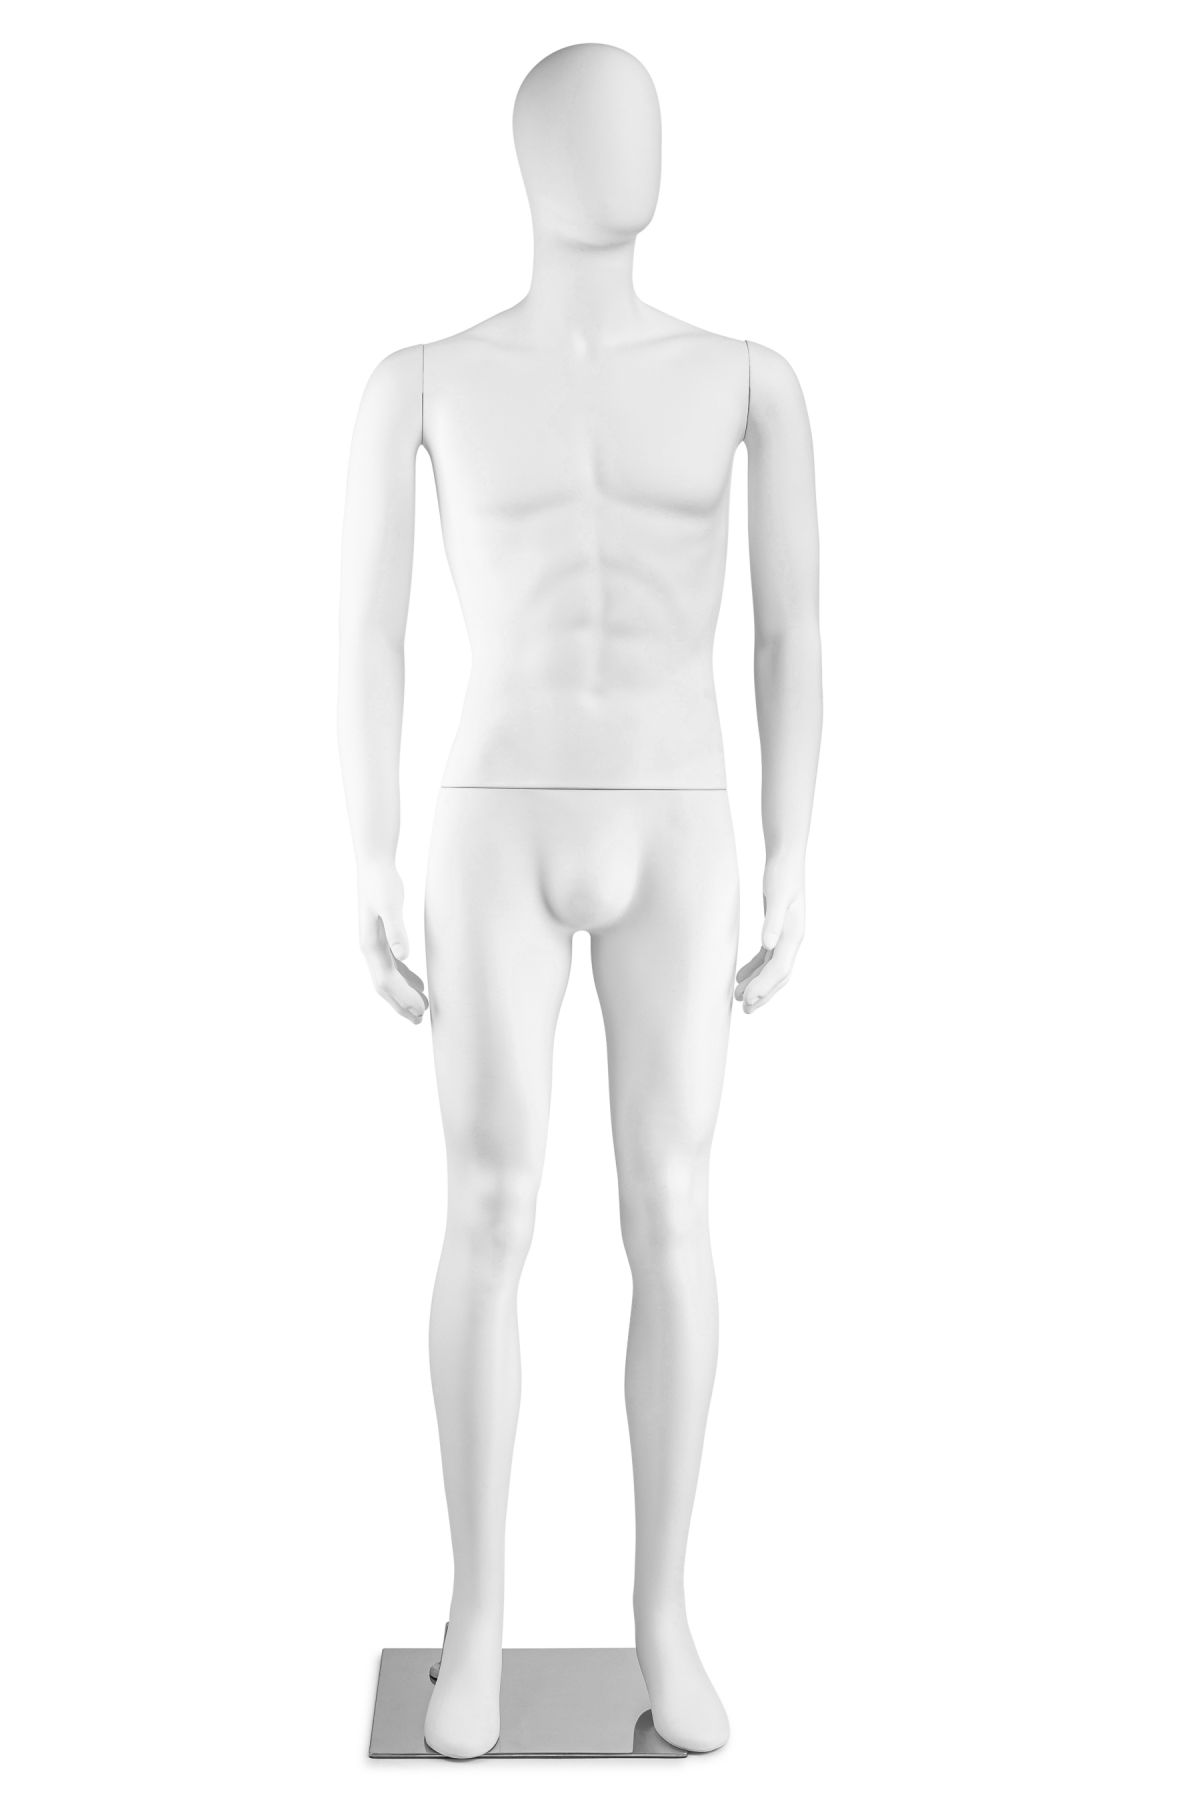 Shop for Glossy White Plastic PP Male Mannequin Full Body Standing Style at  Wholesale Price on